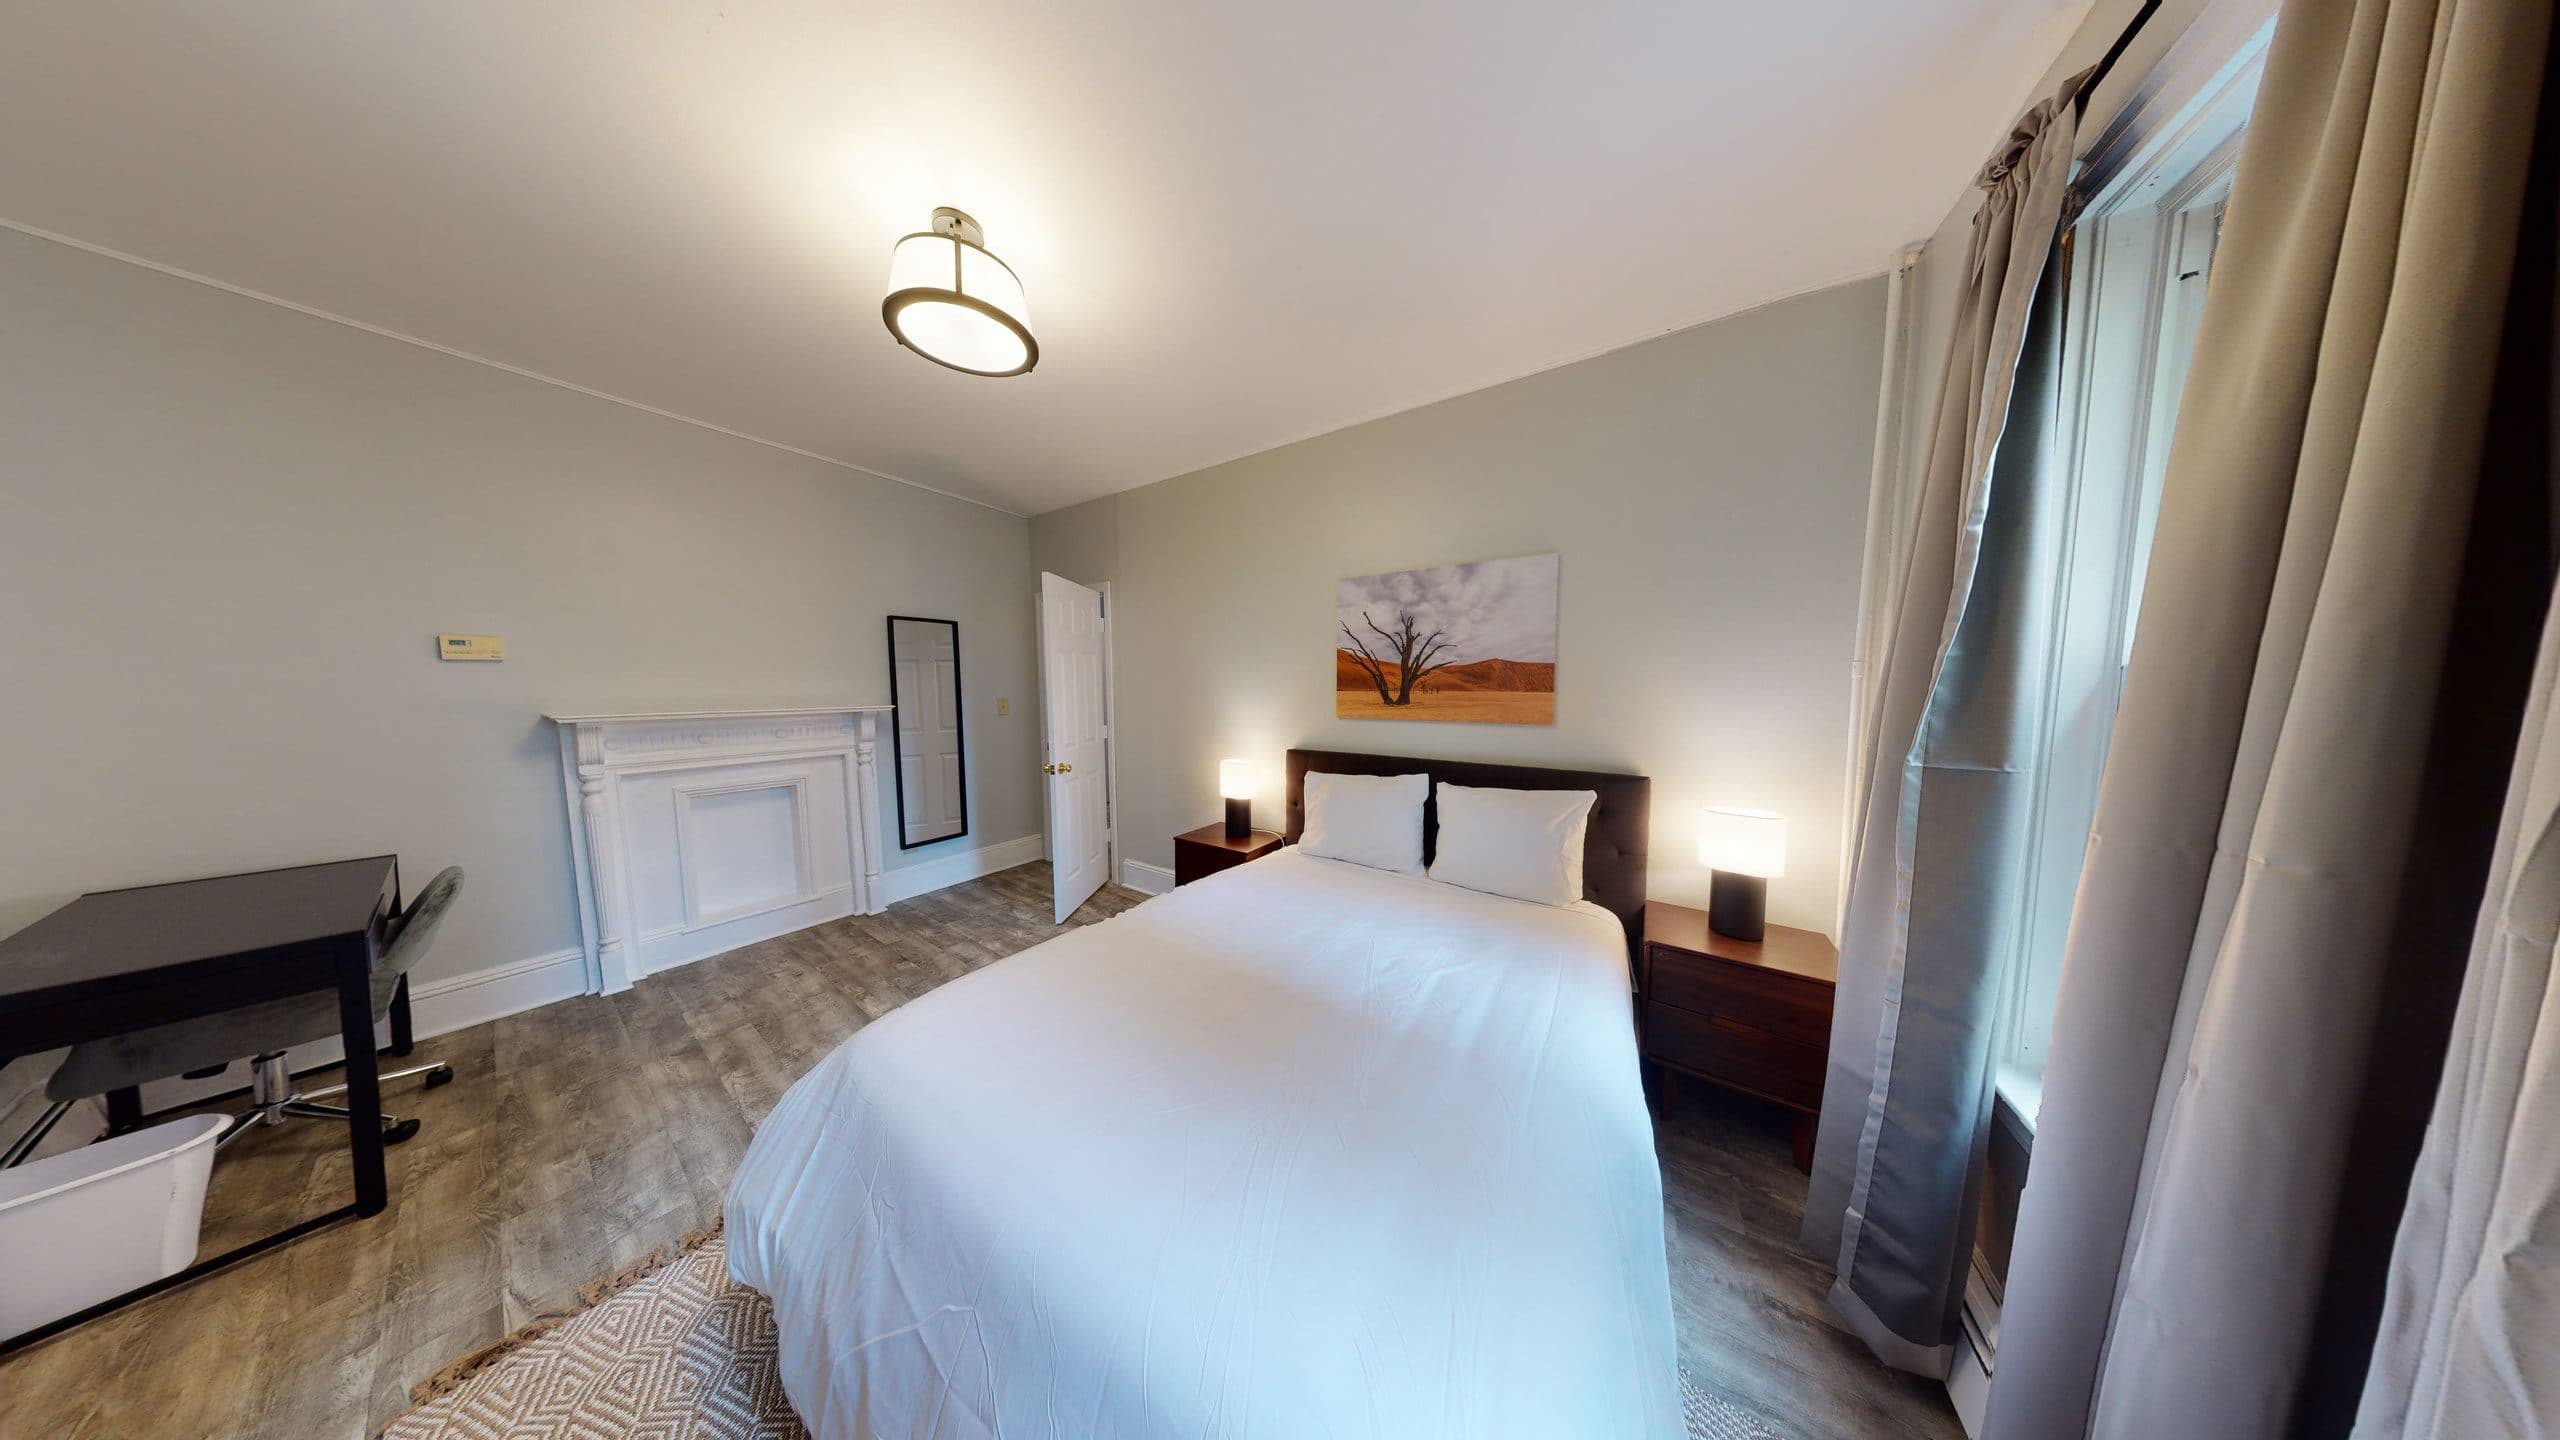 Photo 16 of #1212: Queen Bedroom A at June Homes